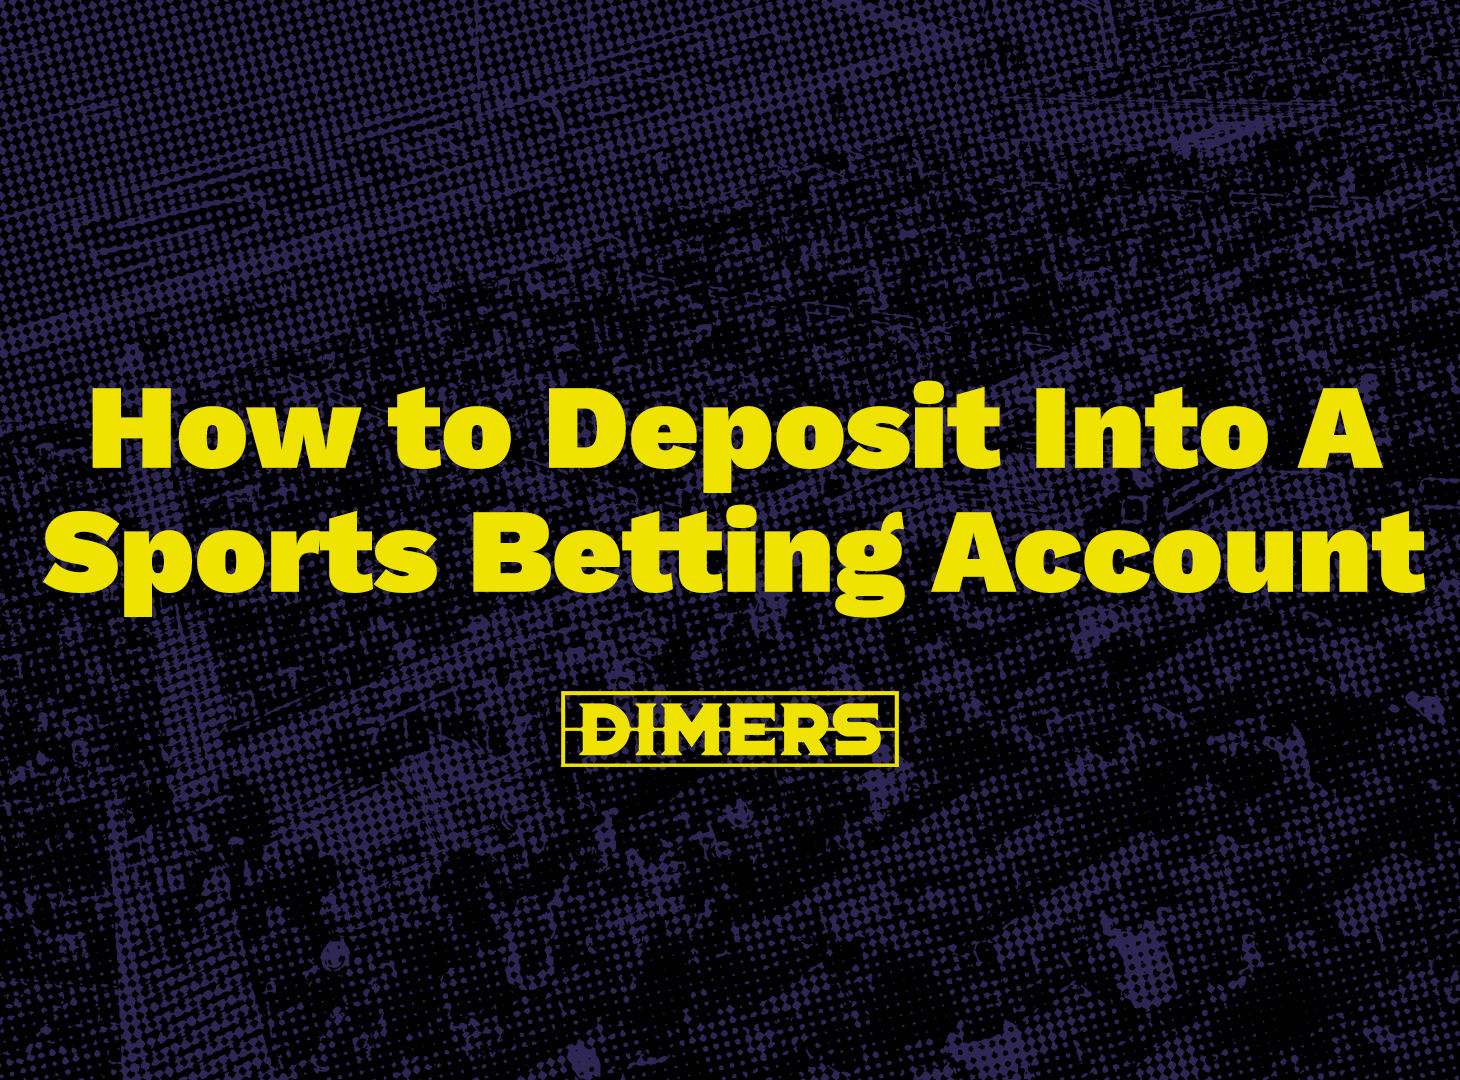 Photo: where can i deposit money to sports bet account